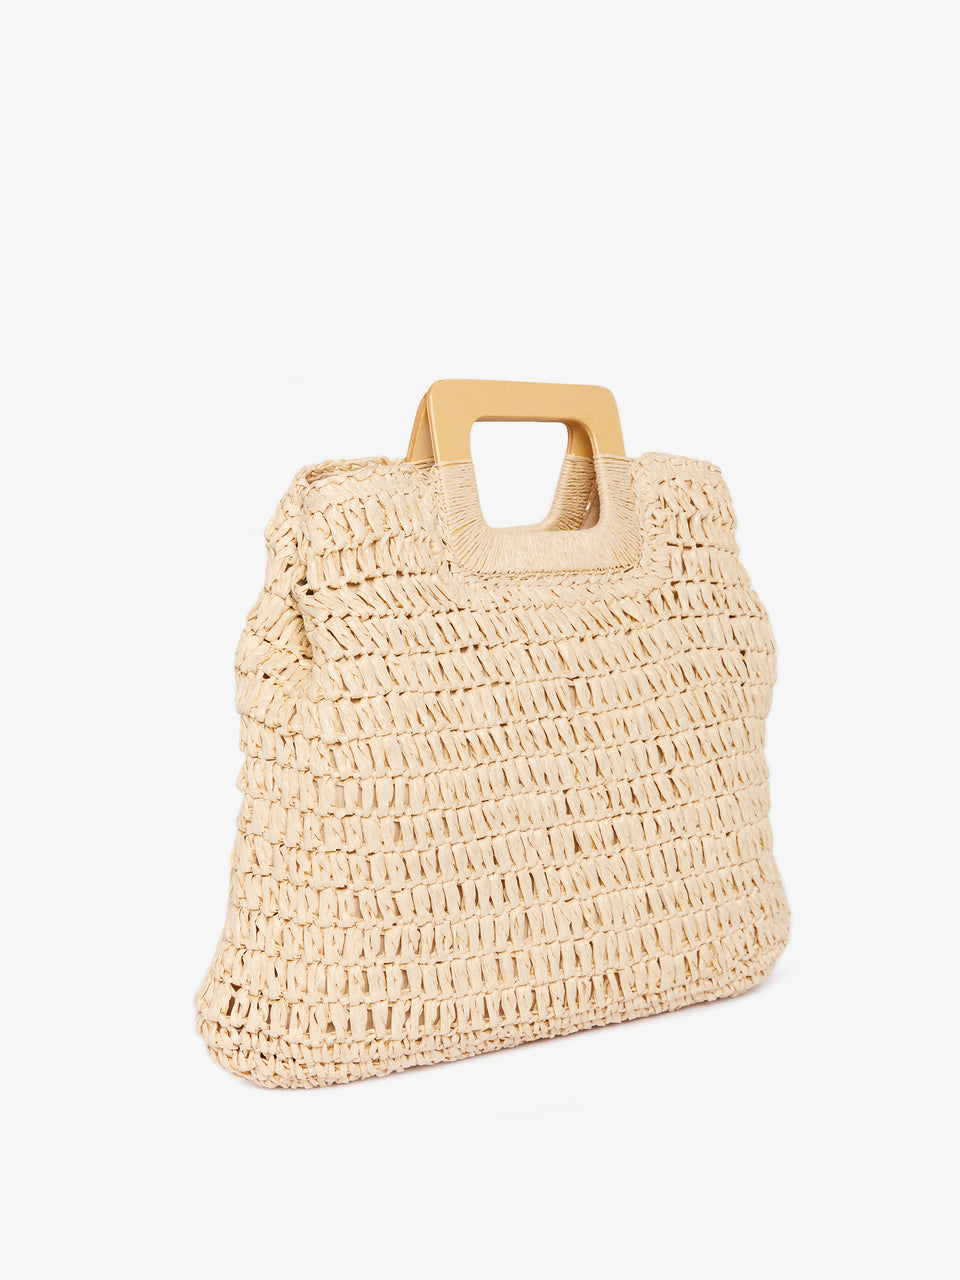 The Harley Straw Tote